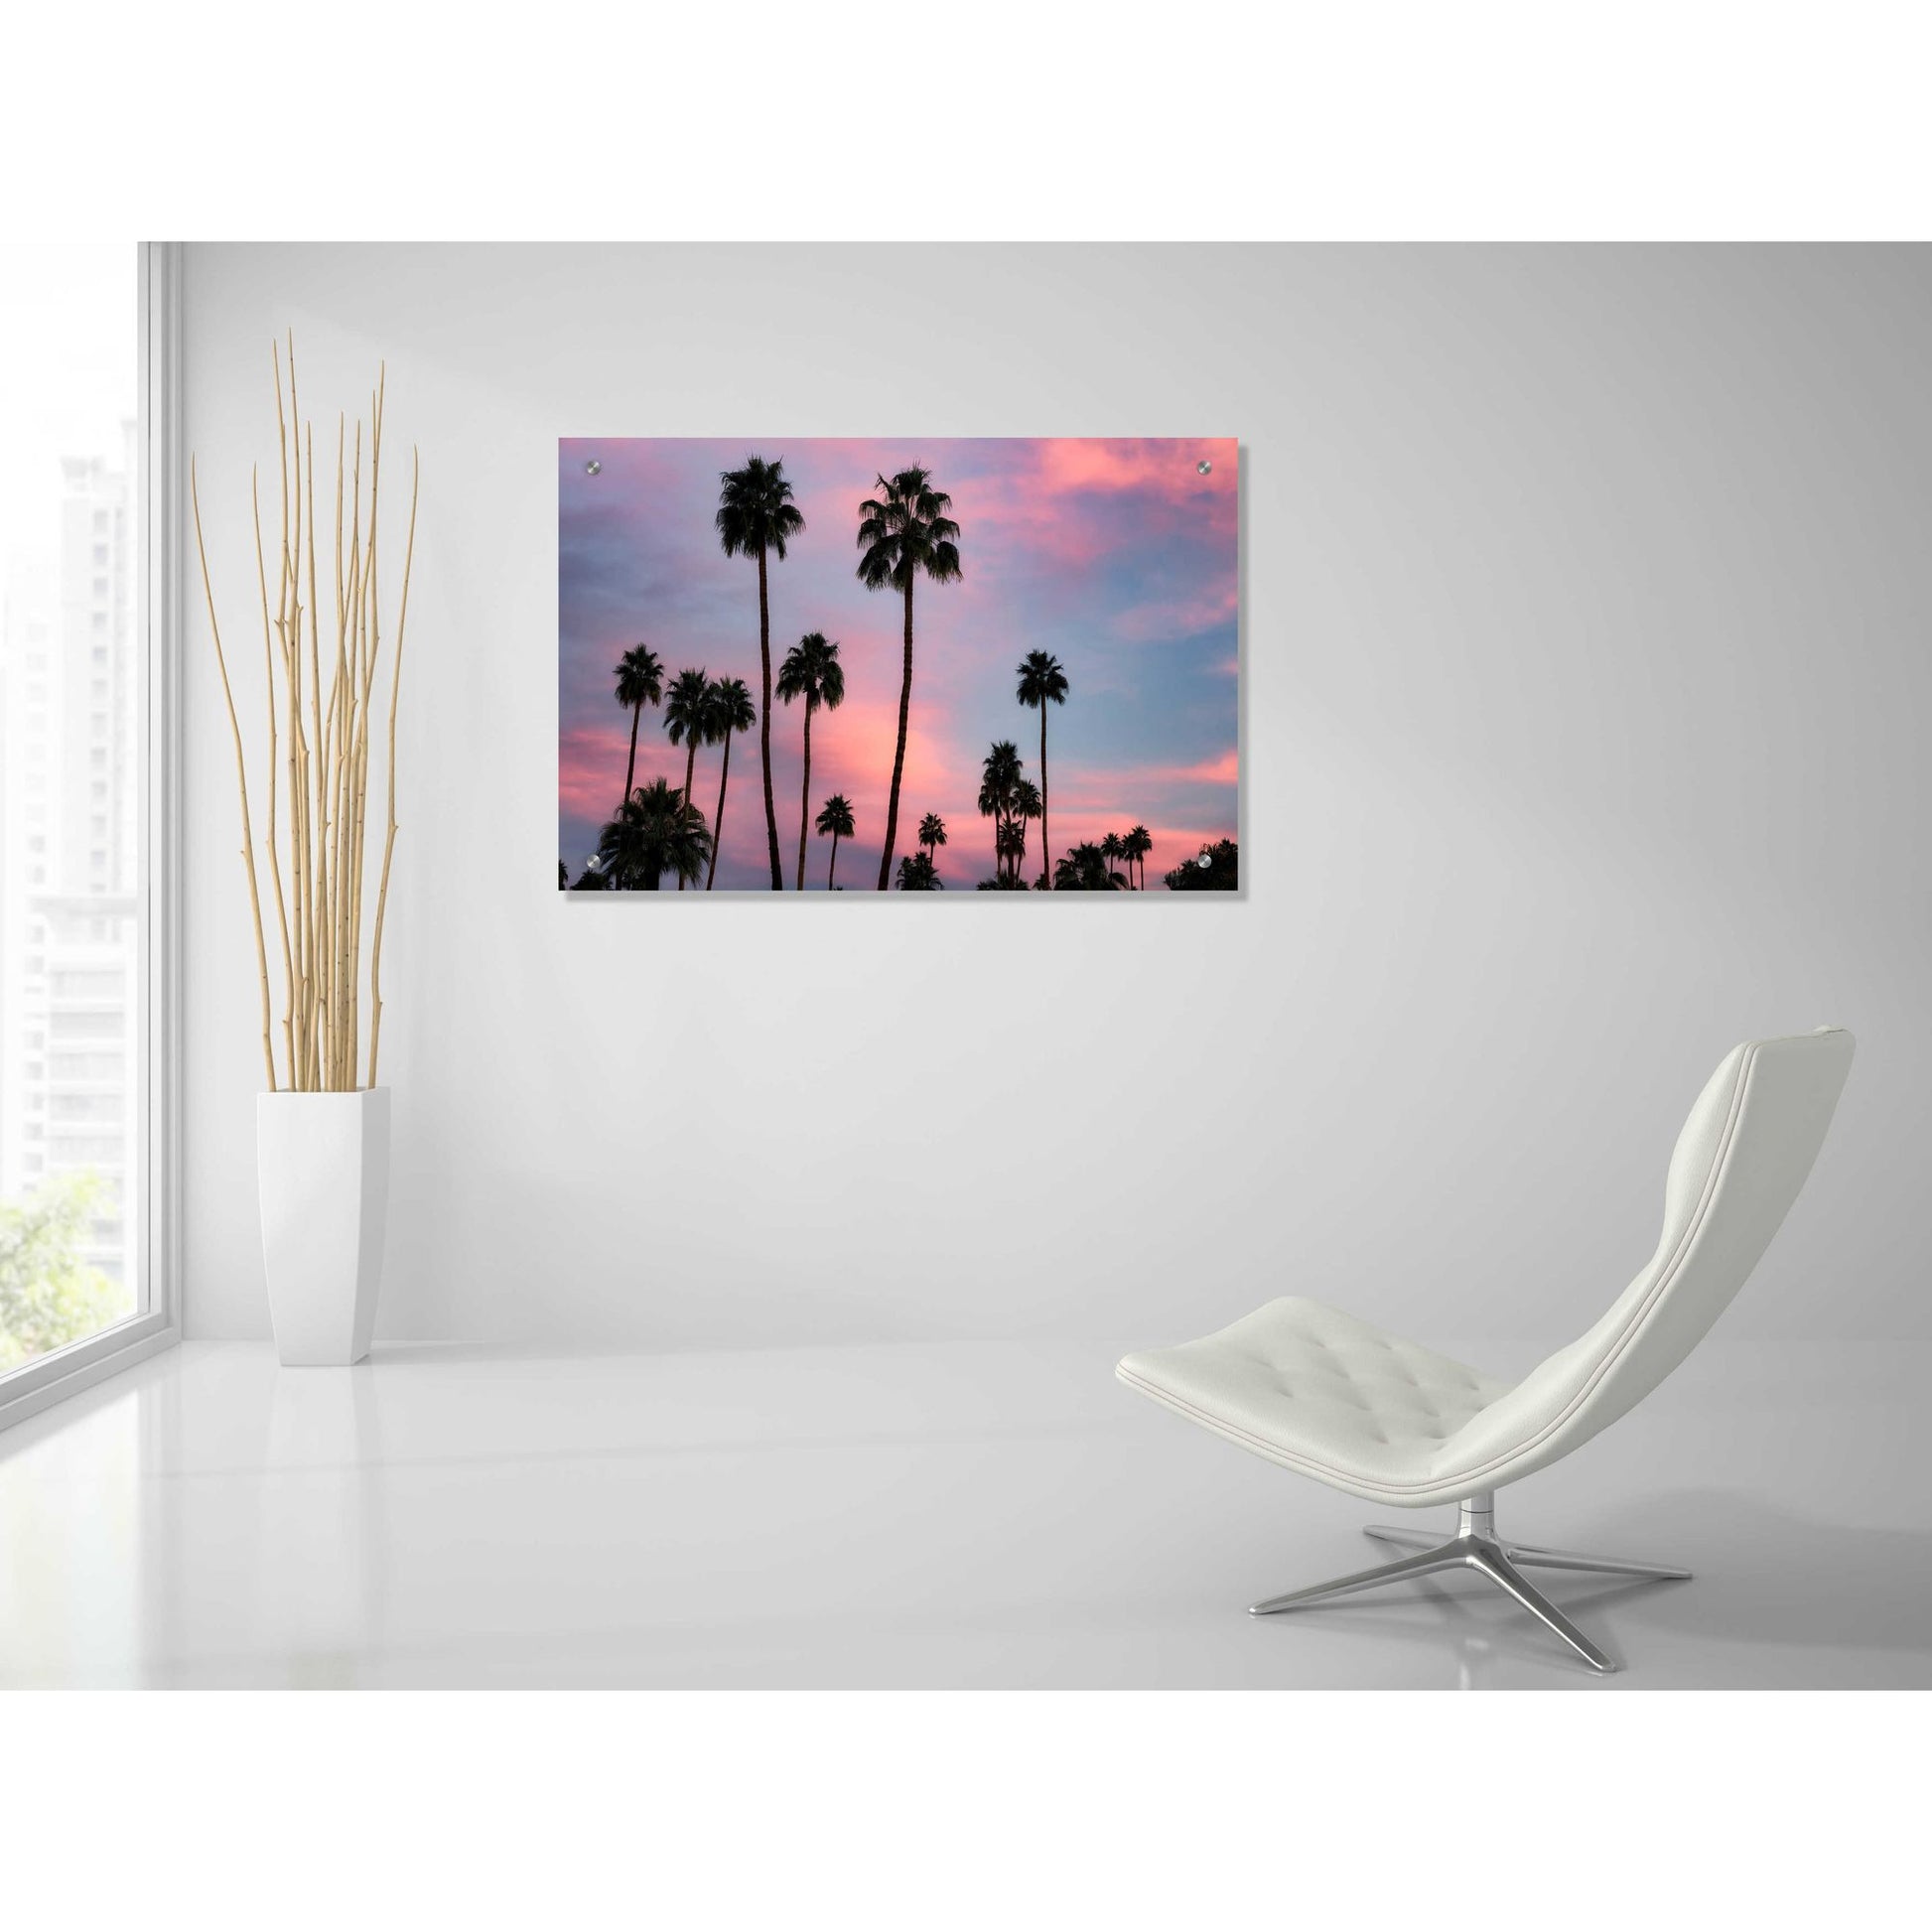 Epic Art 'Palm Sunset' by Dennis Frates, Acrylic Glass Wall Art,36x24